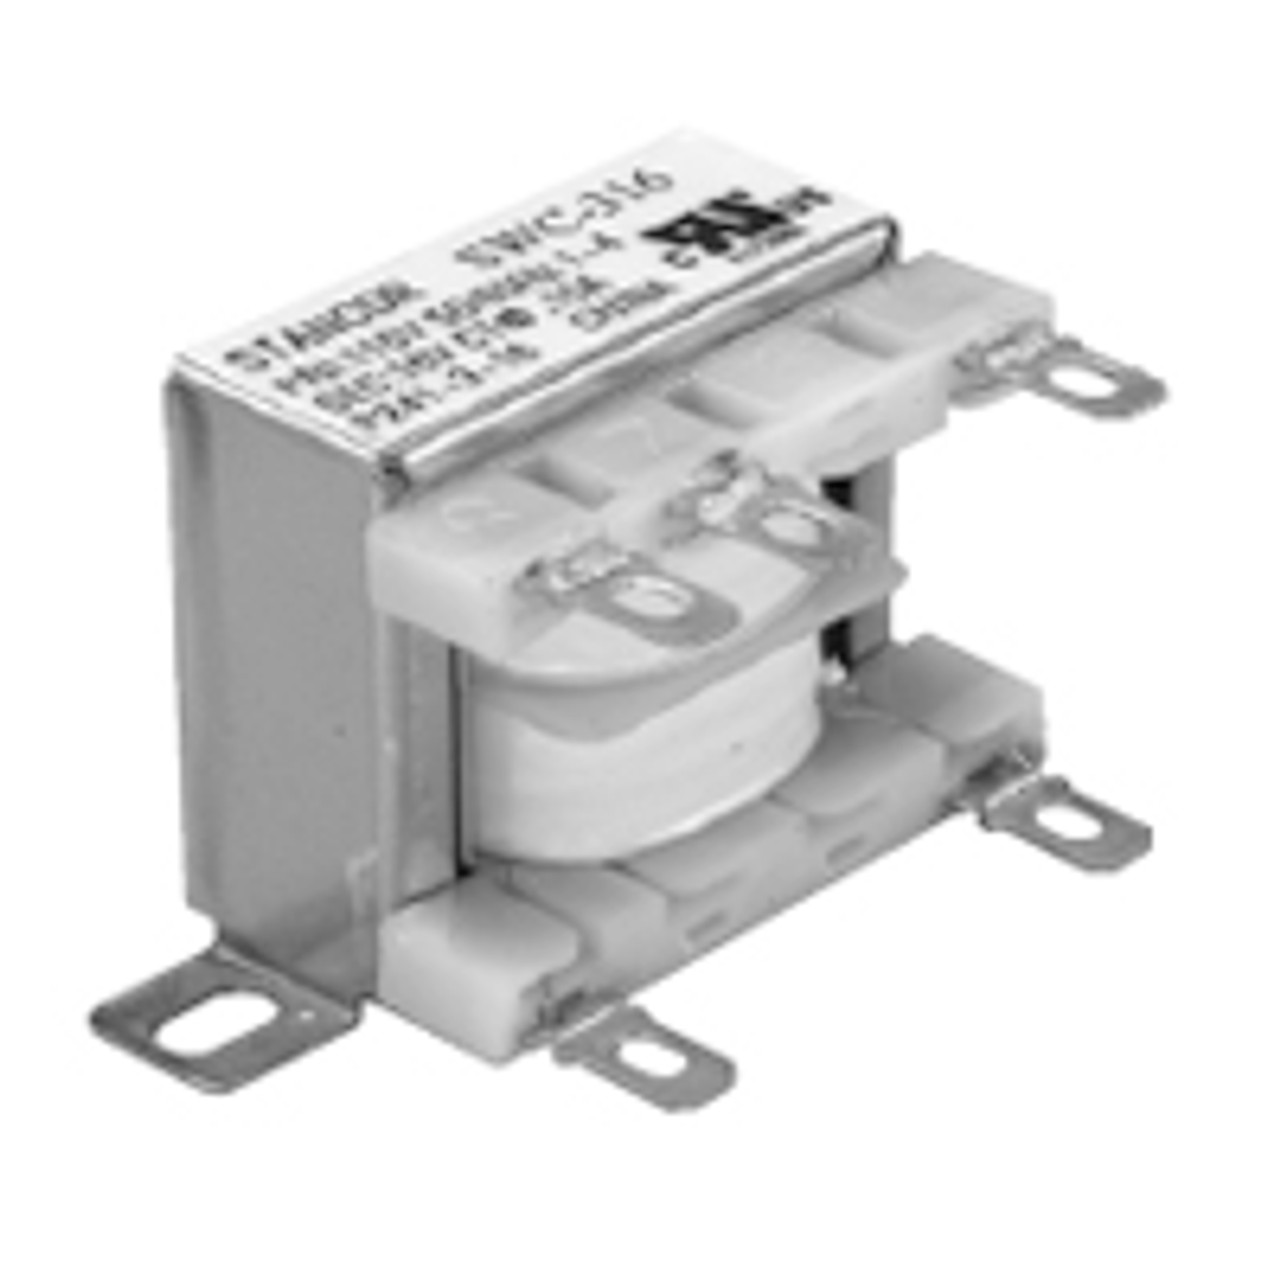 Stancor / White Rodgers SWC-824 Chassis Mount Power Transformers